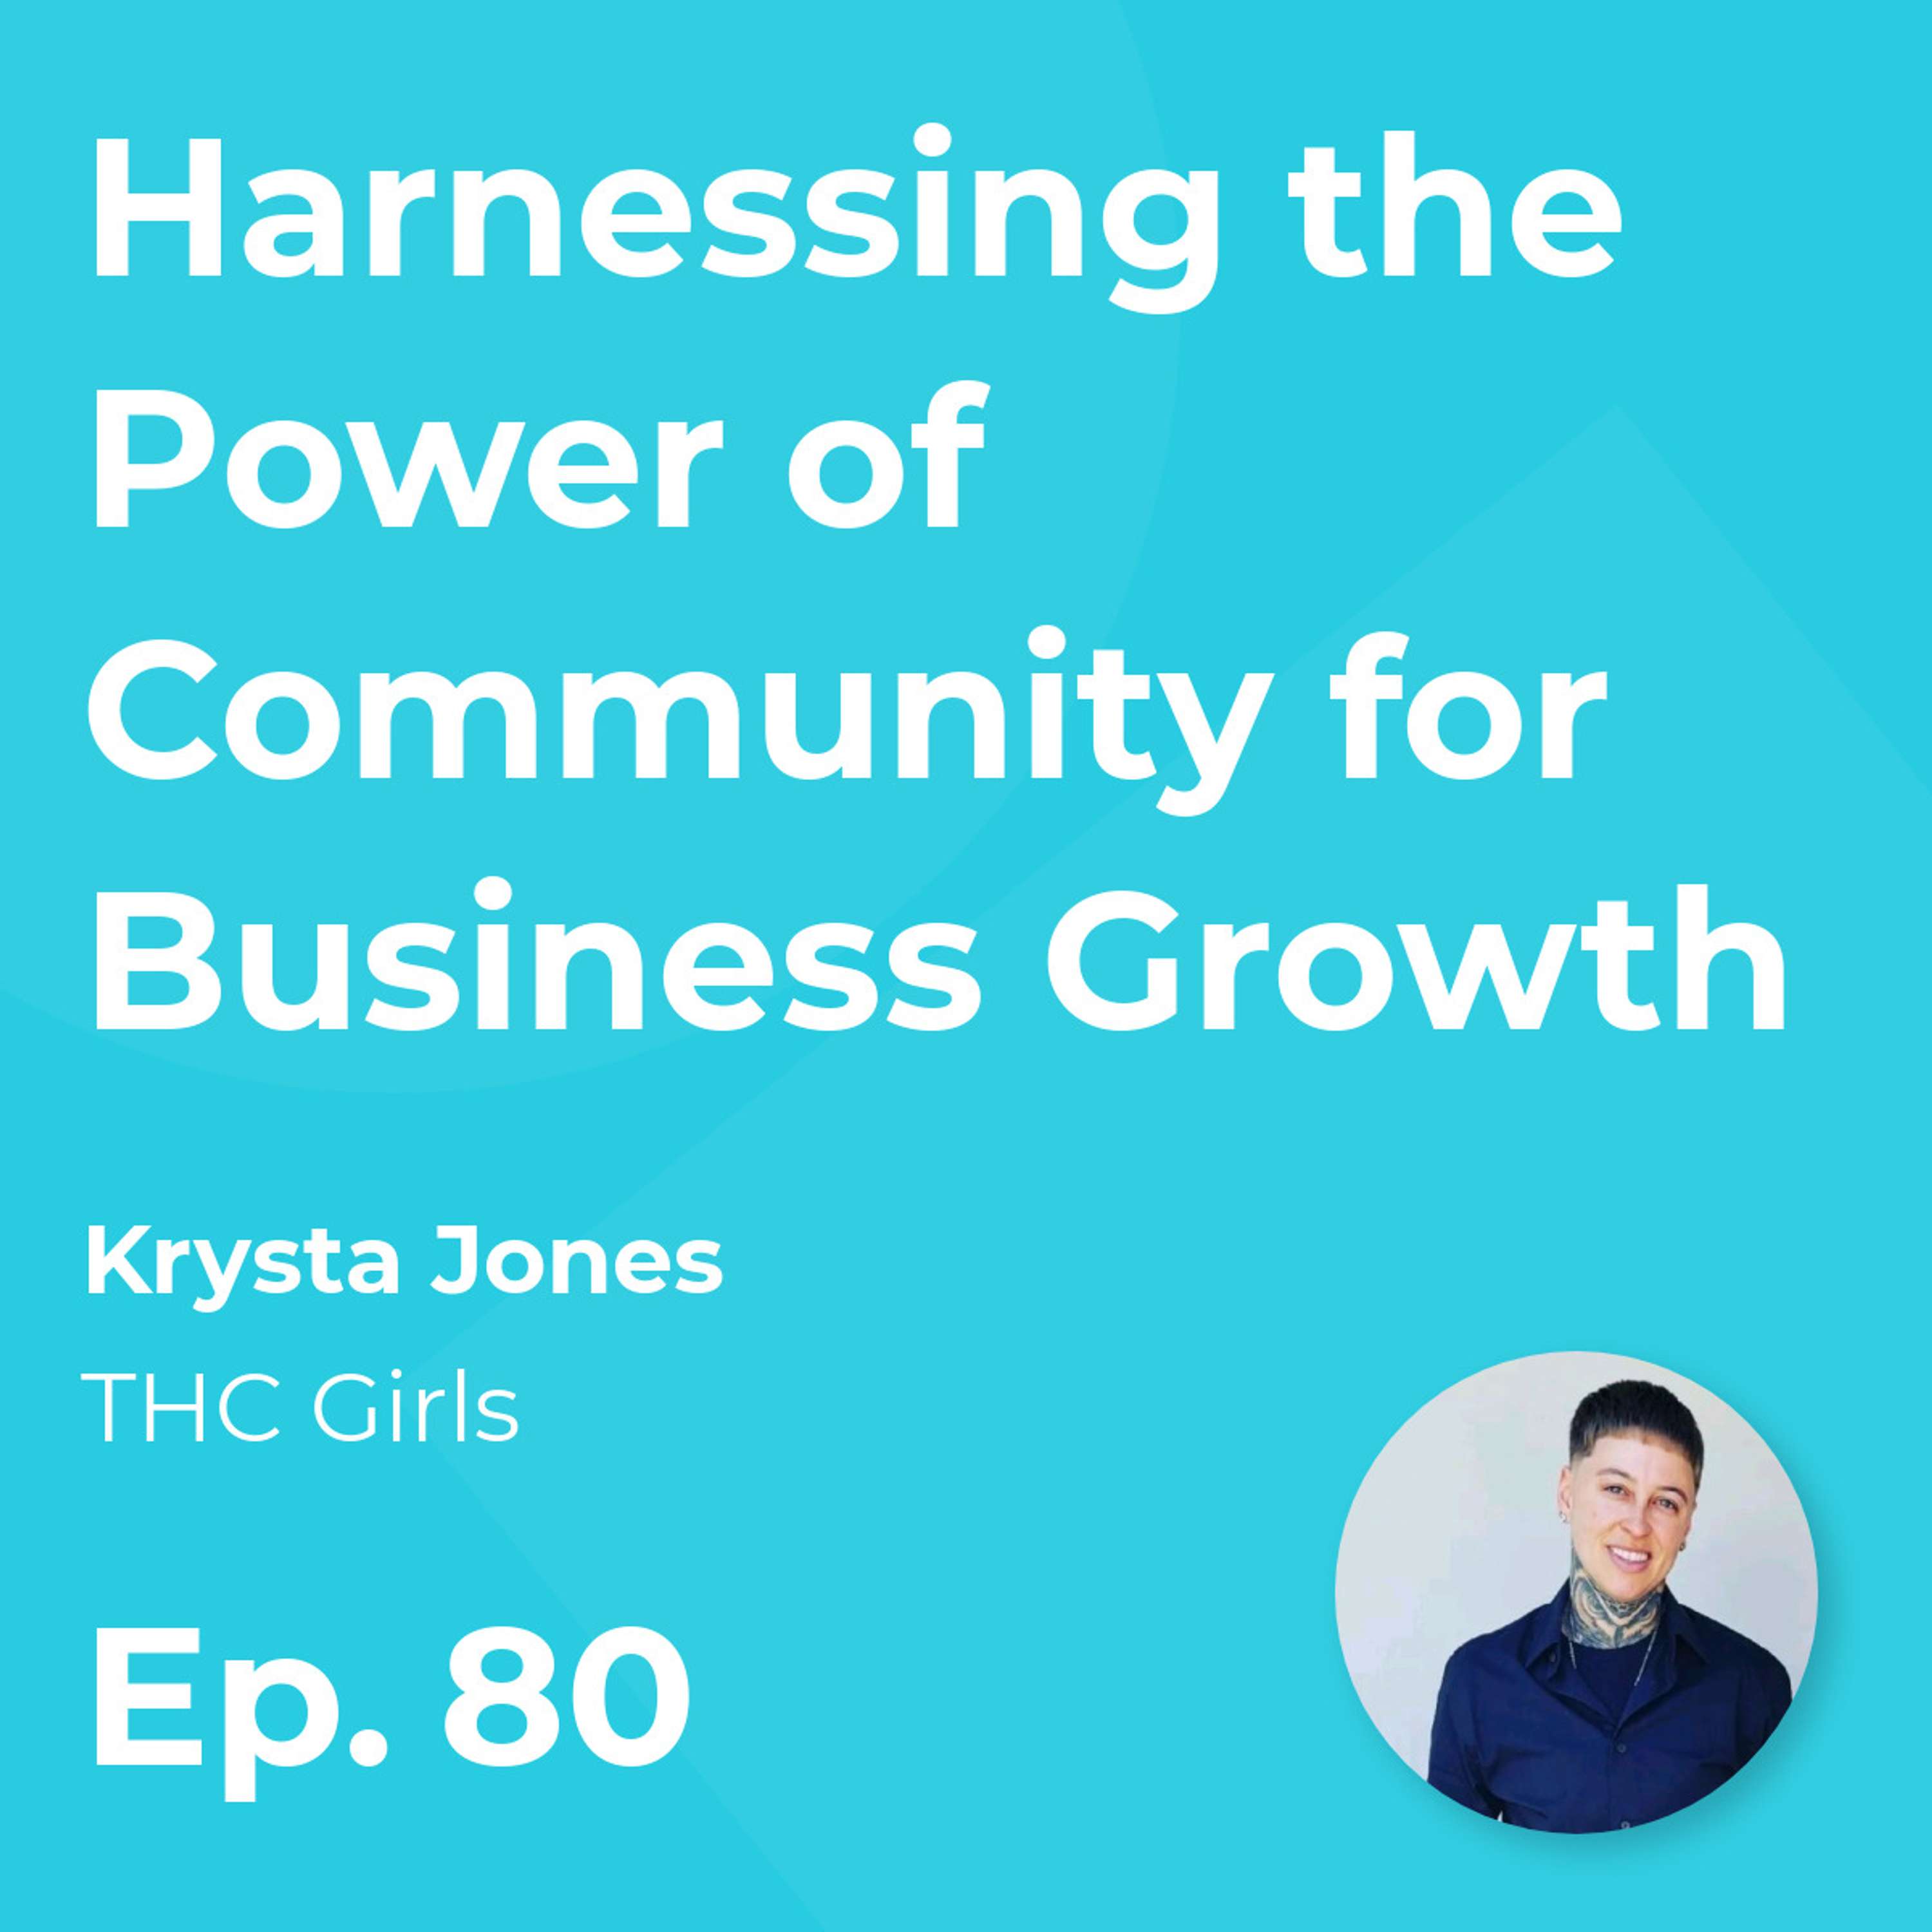 Harnessing the Power of Community for Business Growth with Krysta Jones (THC Girls)